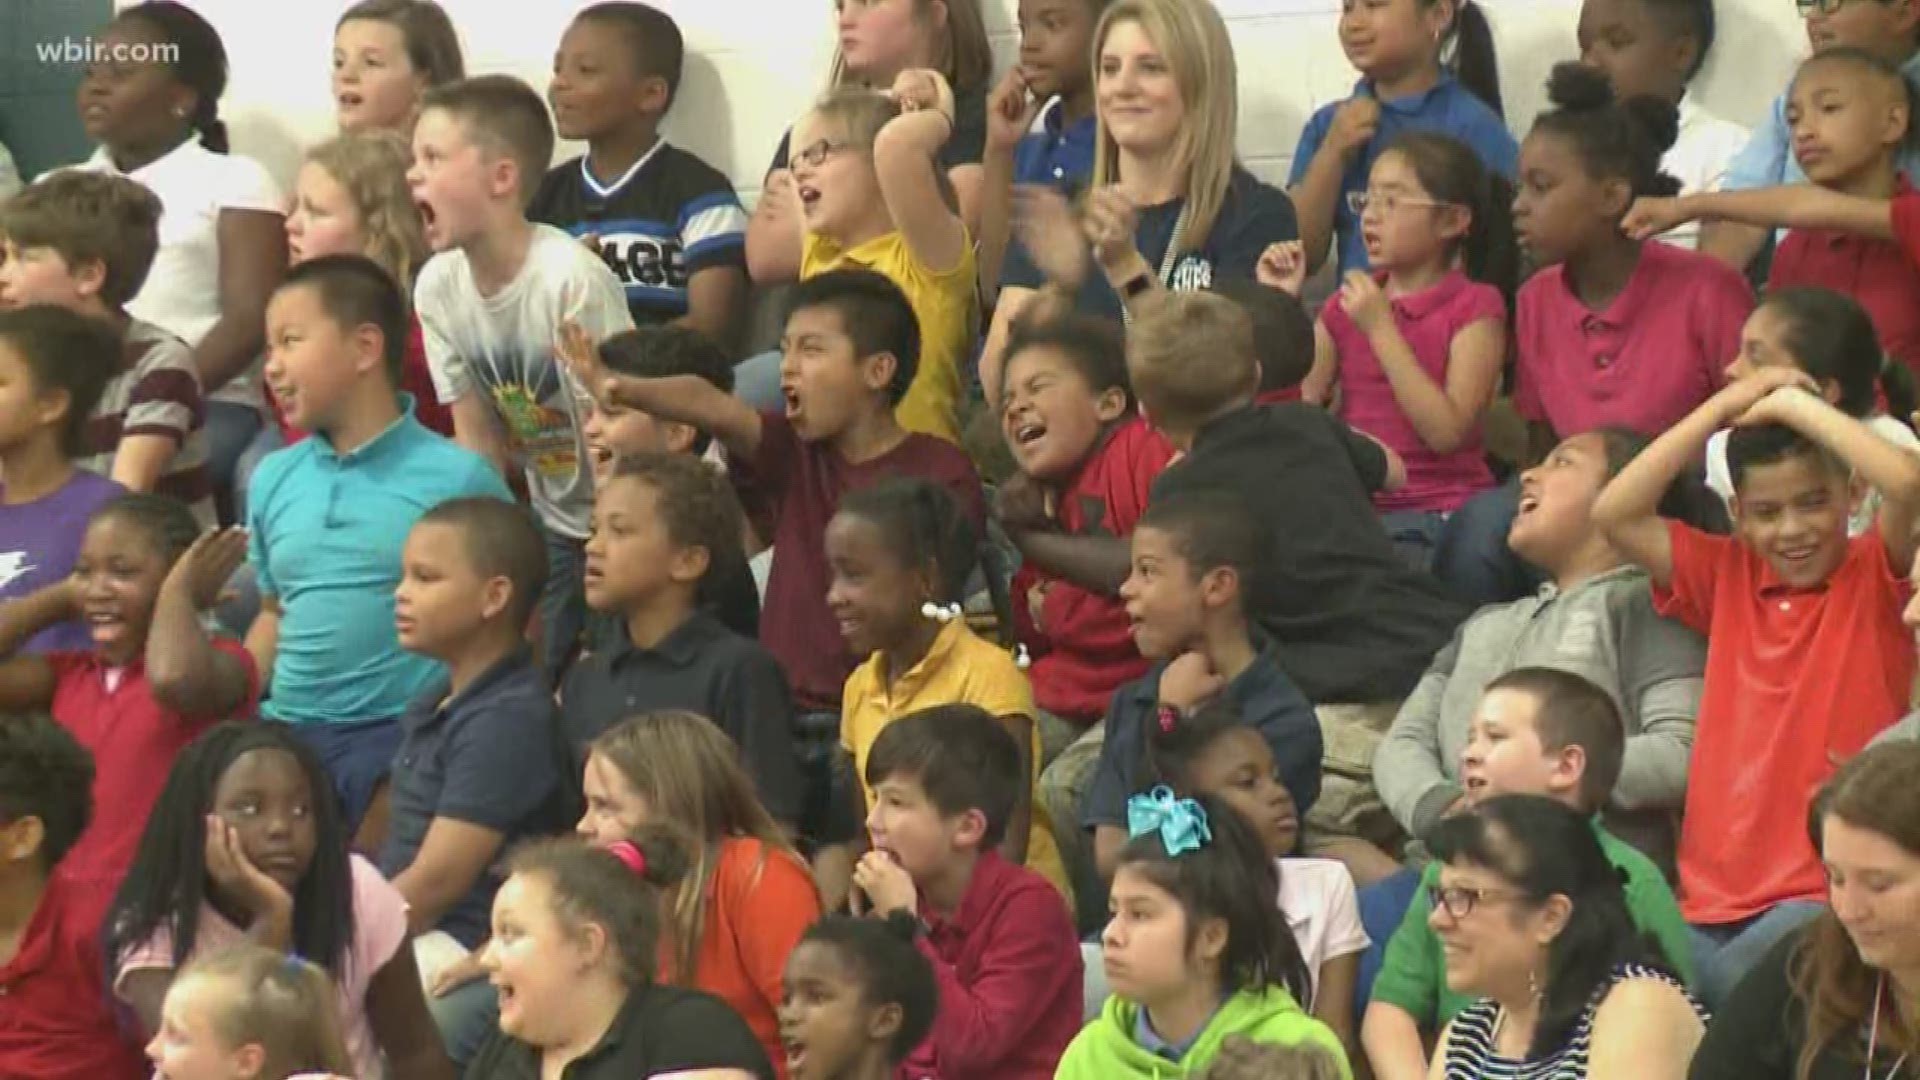 Spring Hill hosts annual basketball game for 5th graders